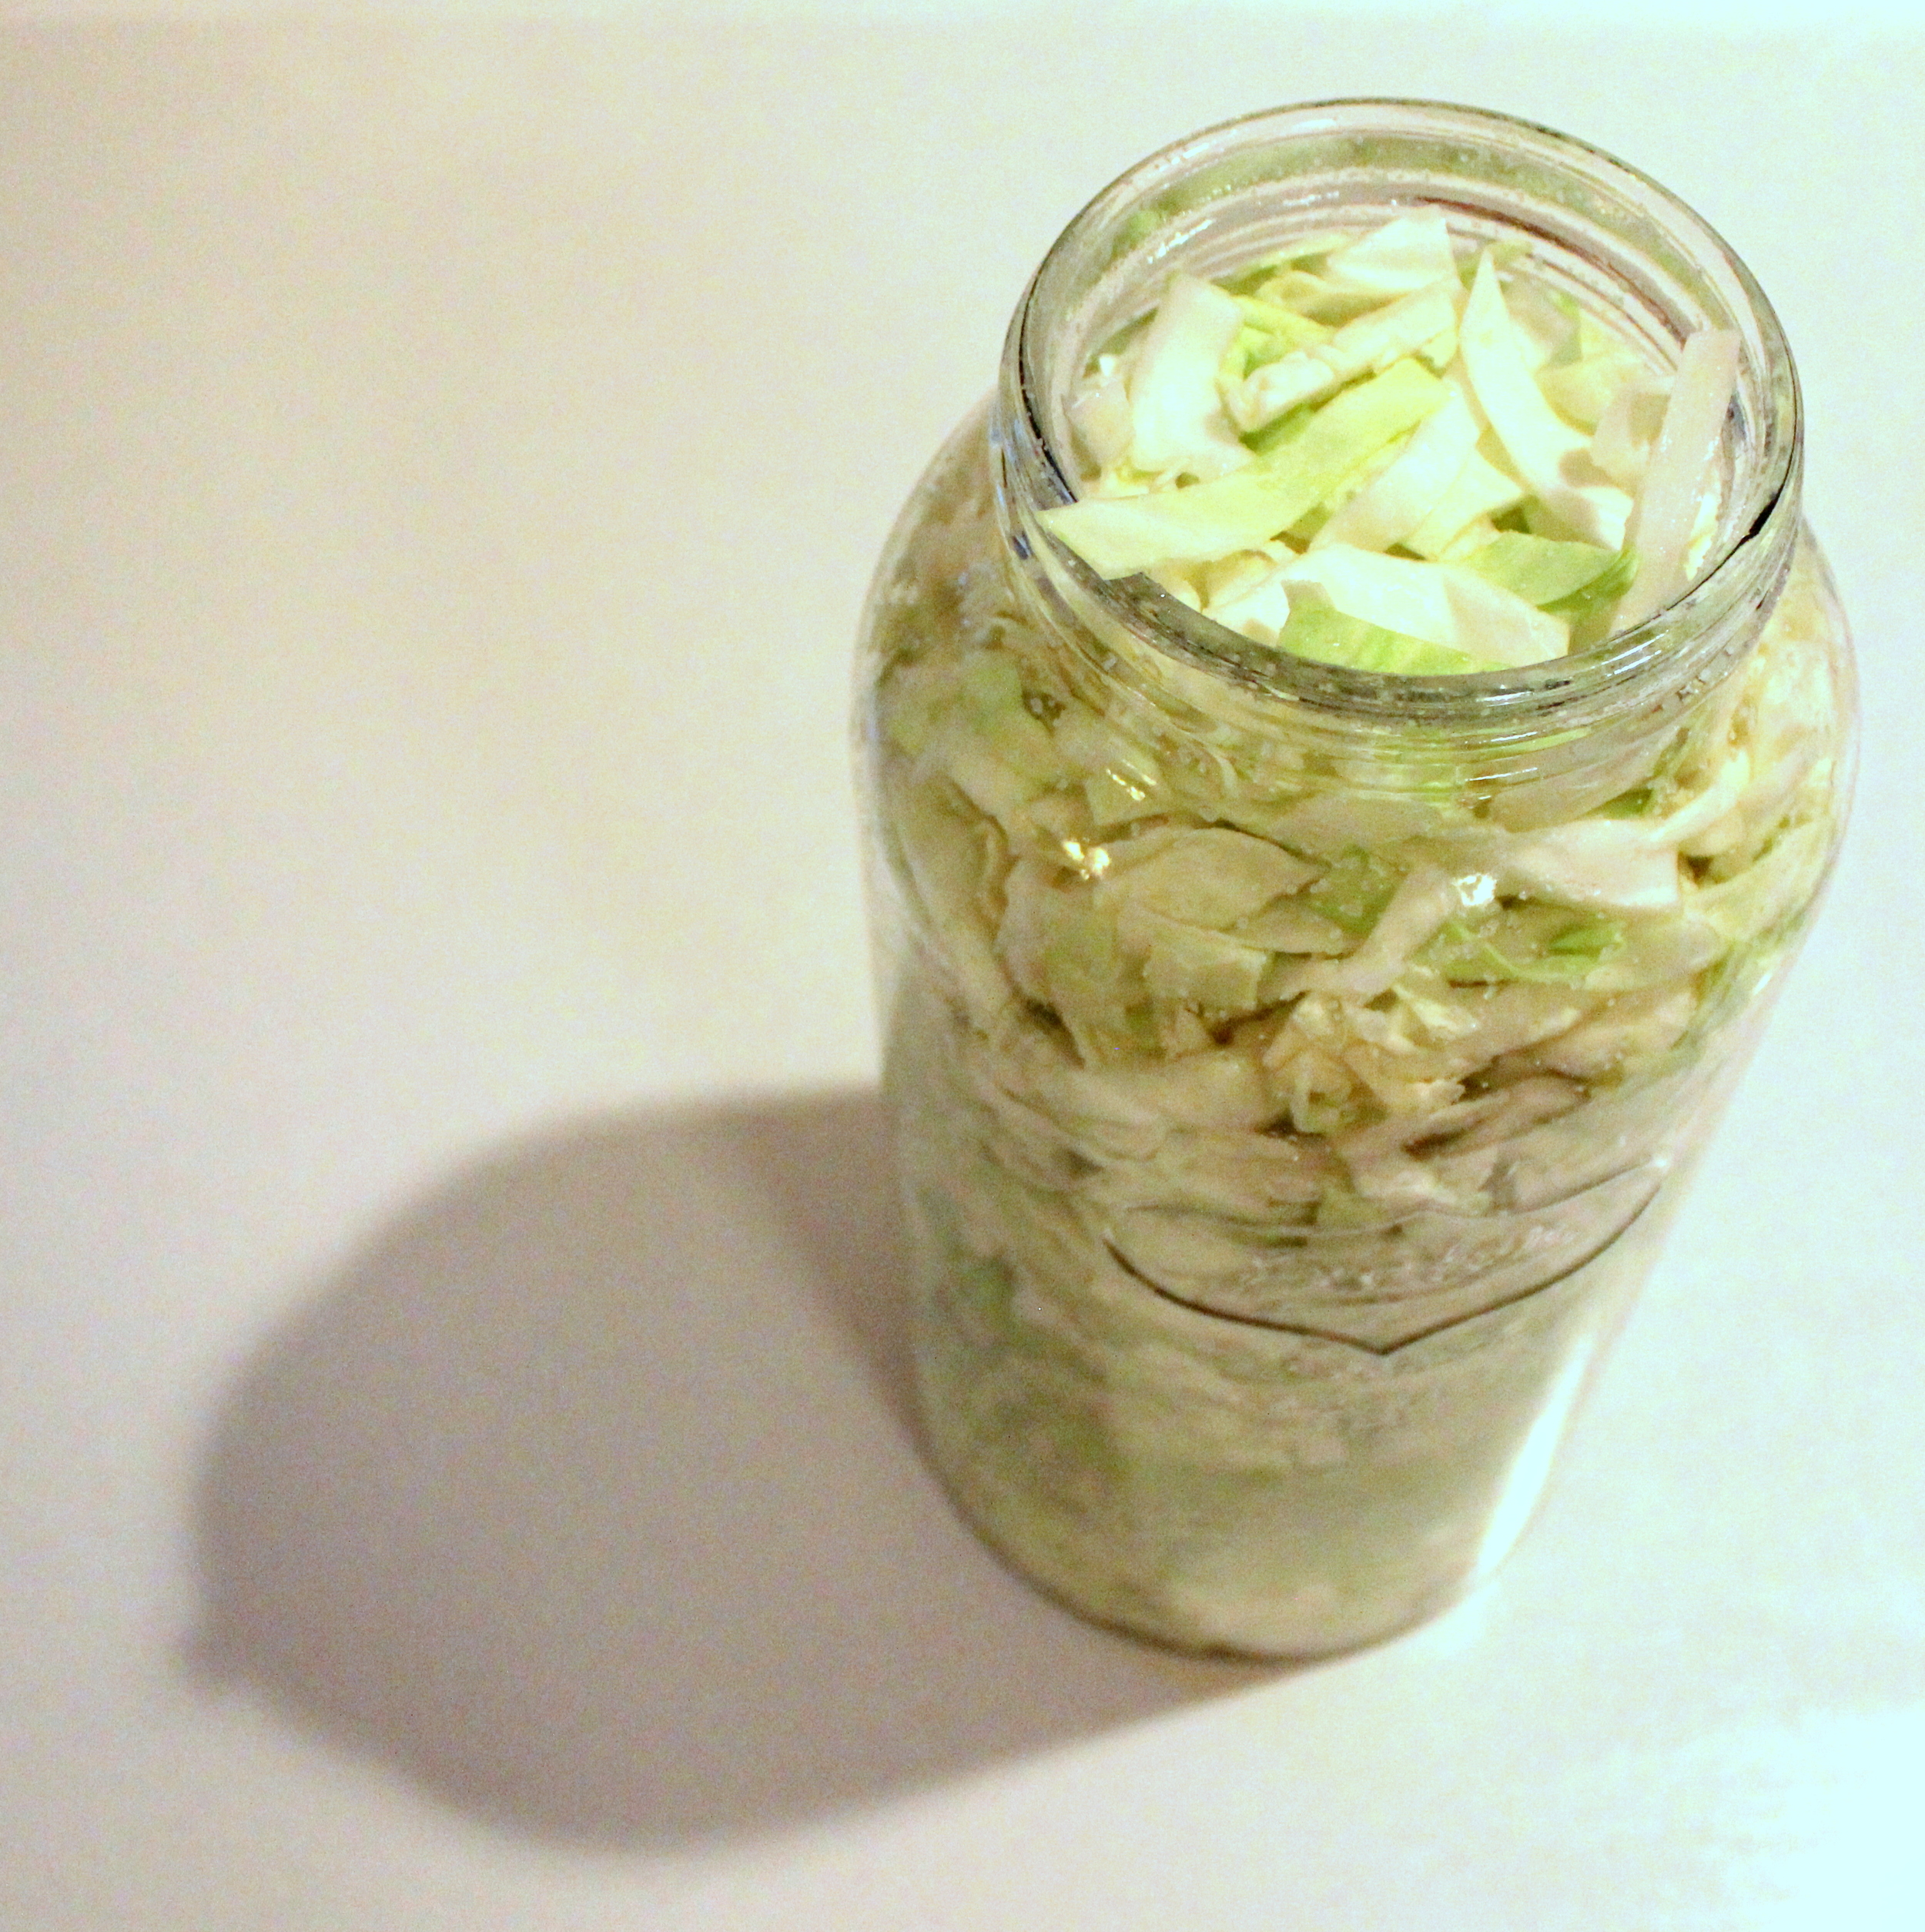 Cabbage to Sauekraut: the miracle of fermentation